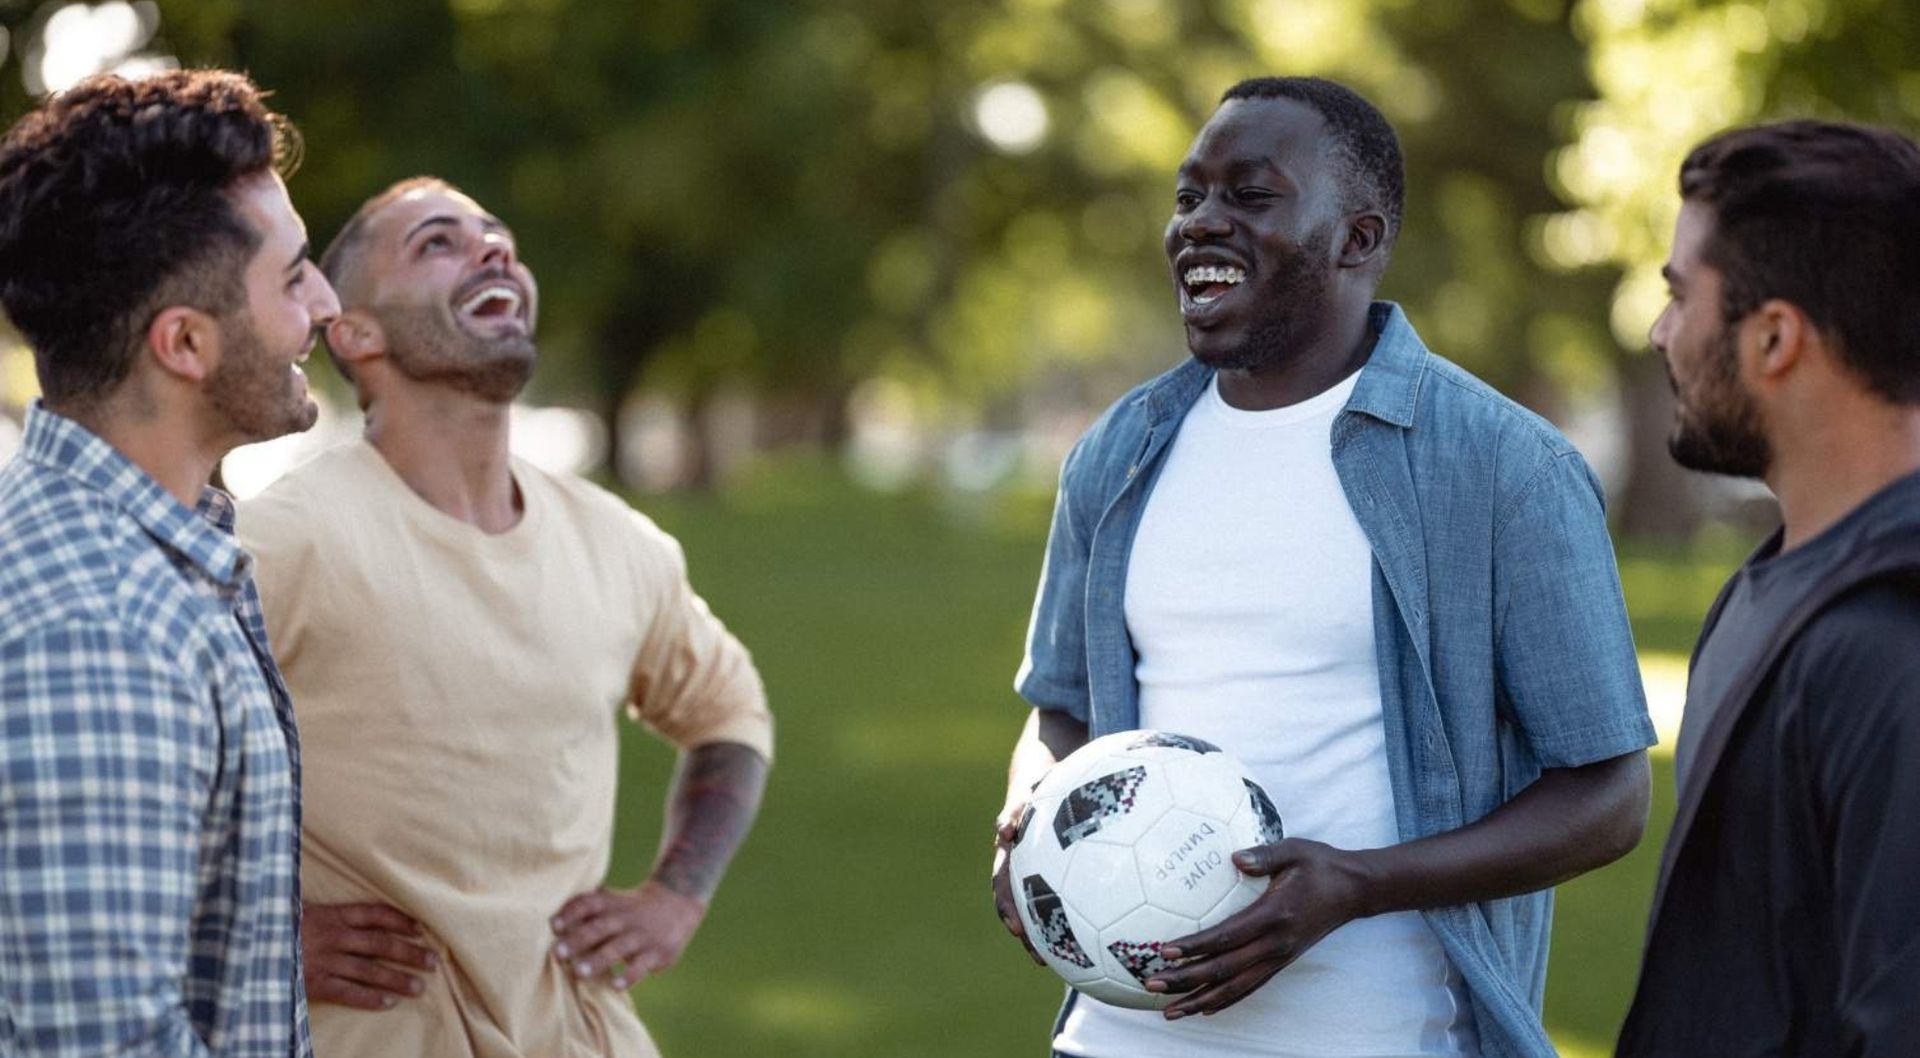 Four men standing in a park with a football laughing and having a good time